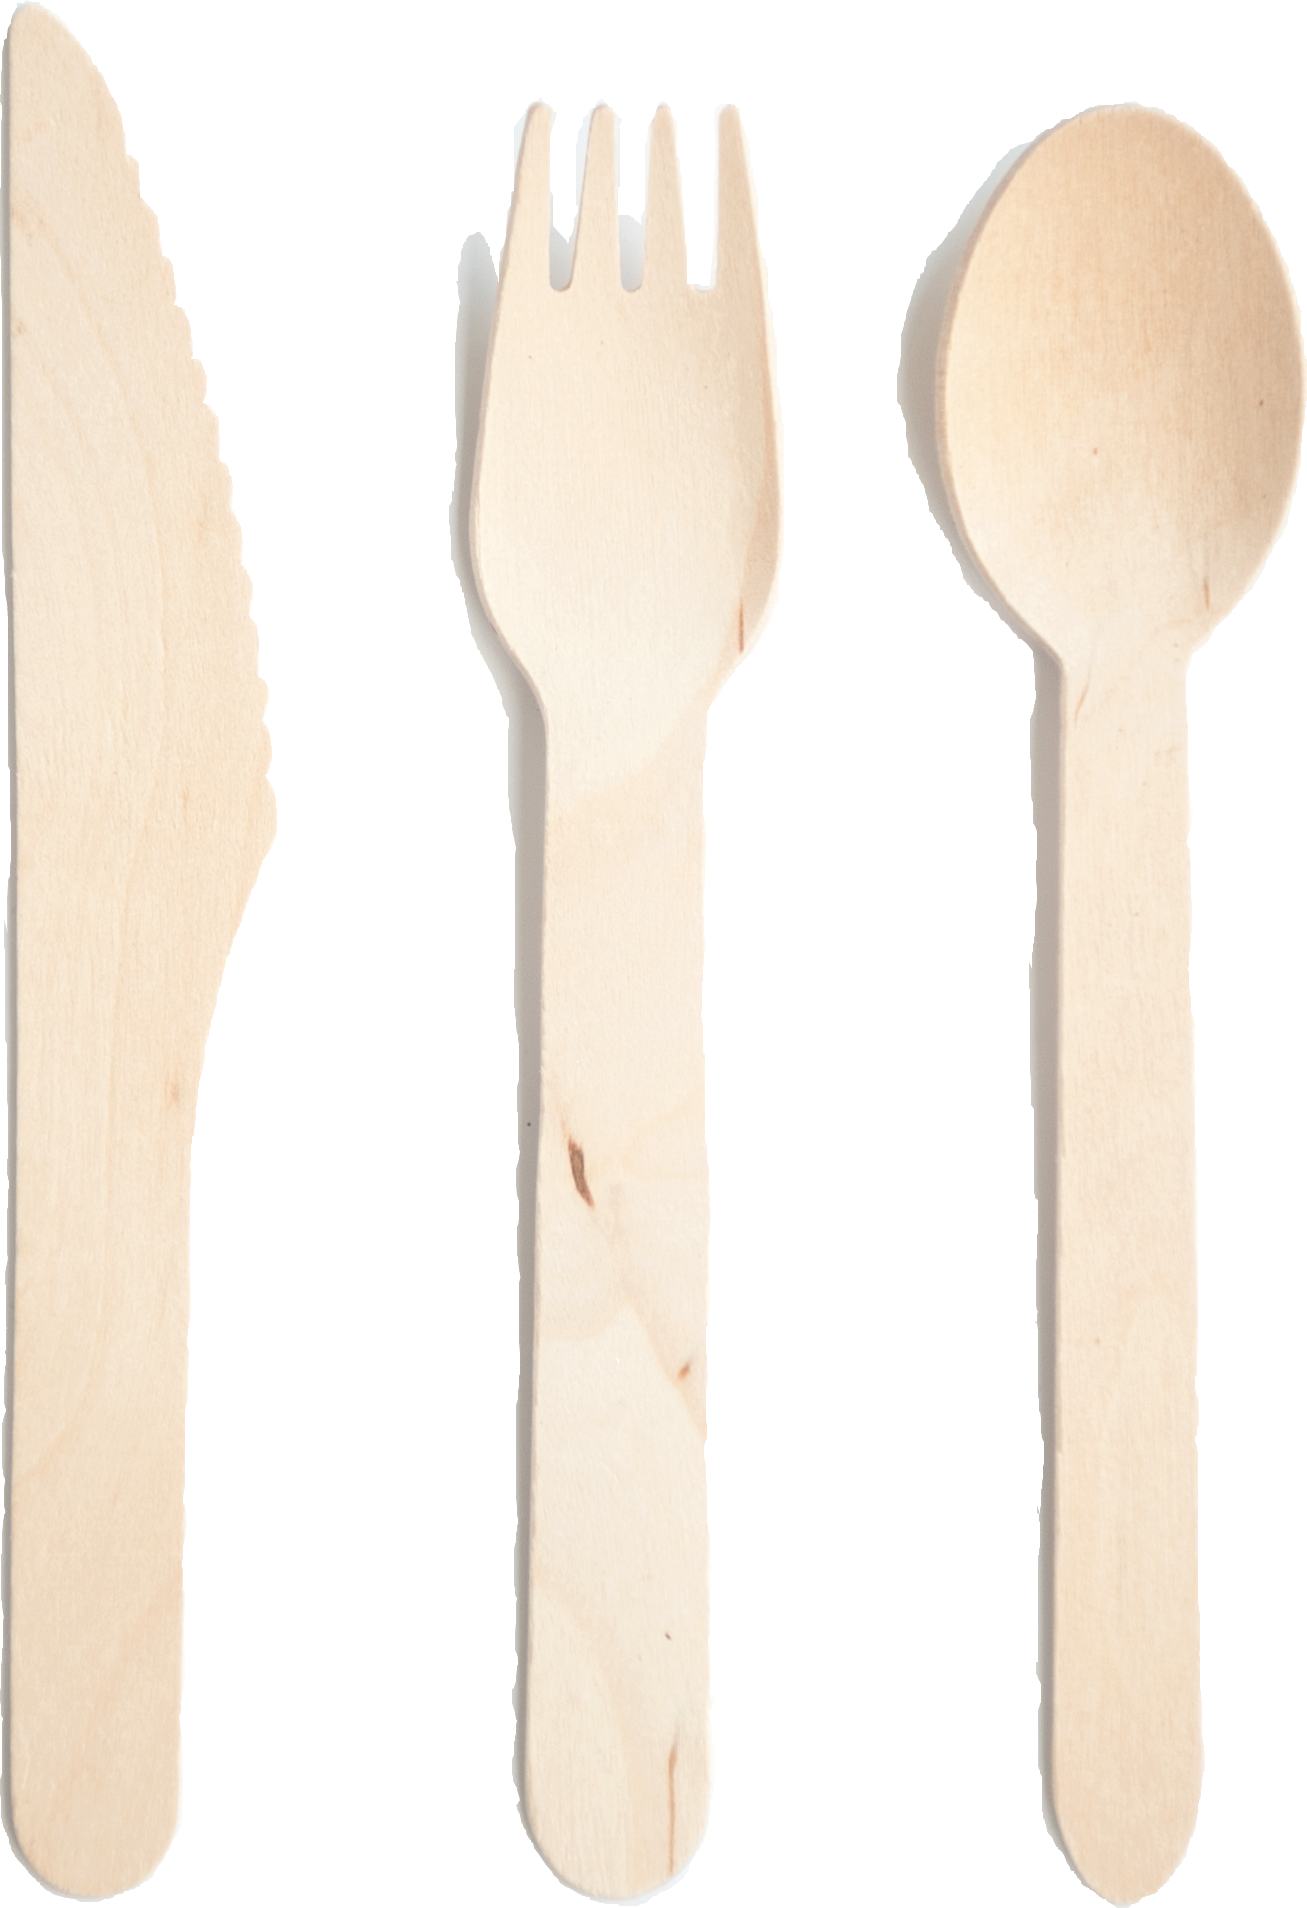 Wooden Cutlery, Eco-Friendly Sustainable Food Service Packaging Products [ABPP Papers]